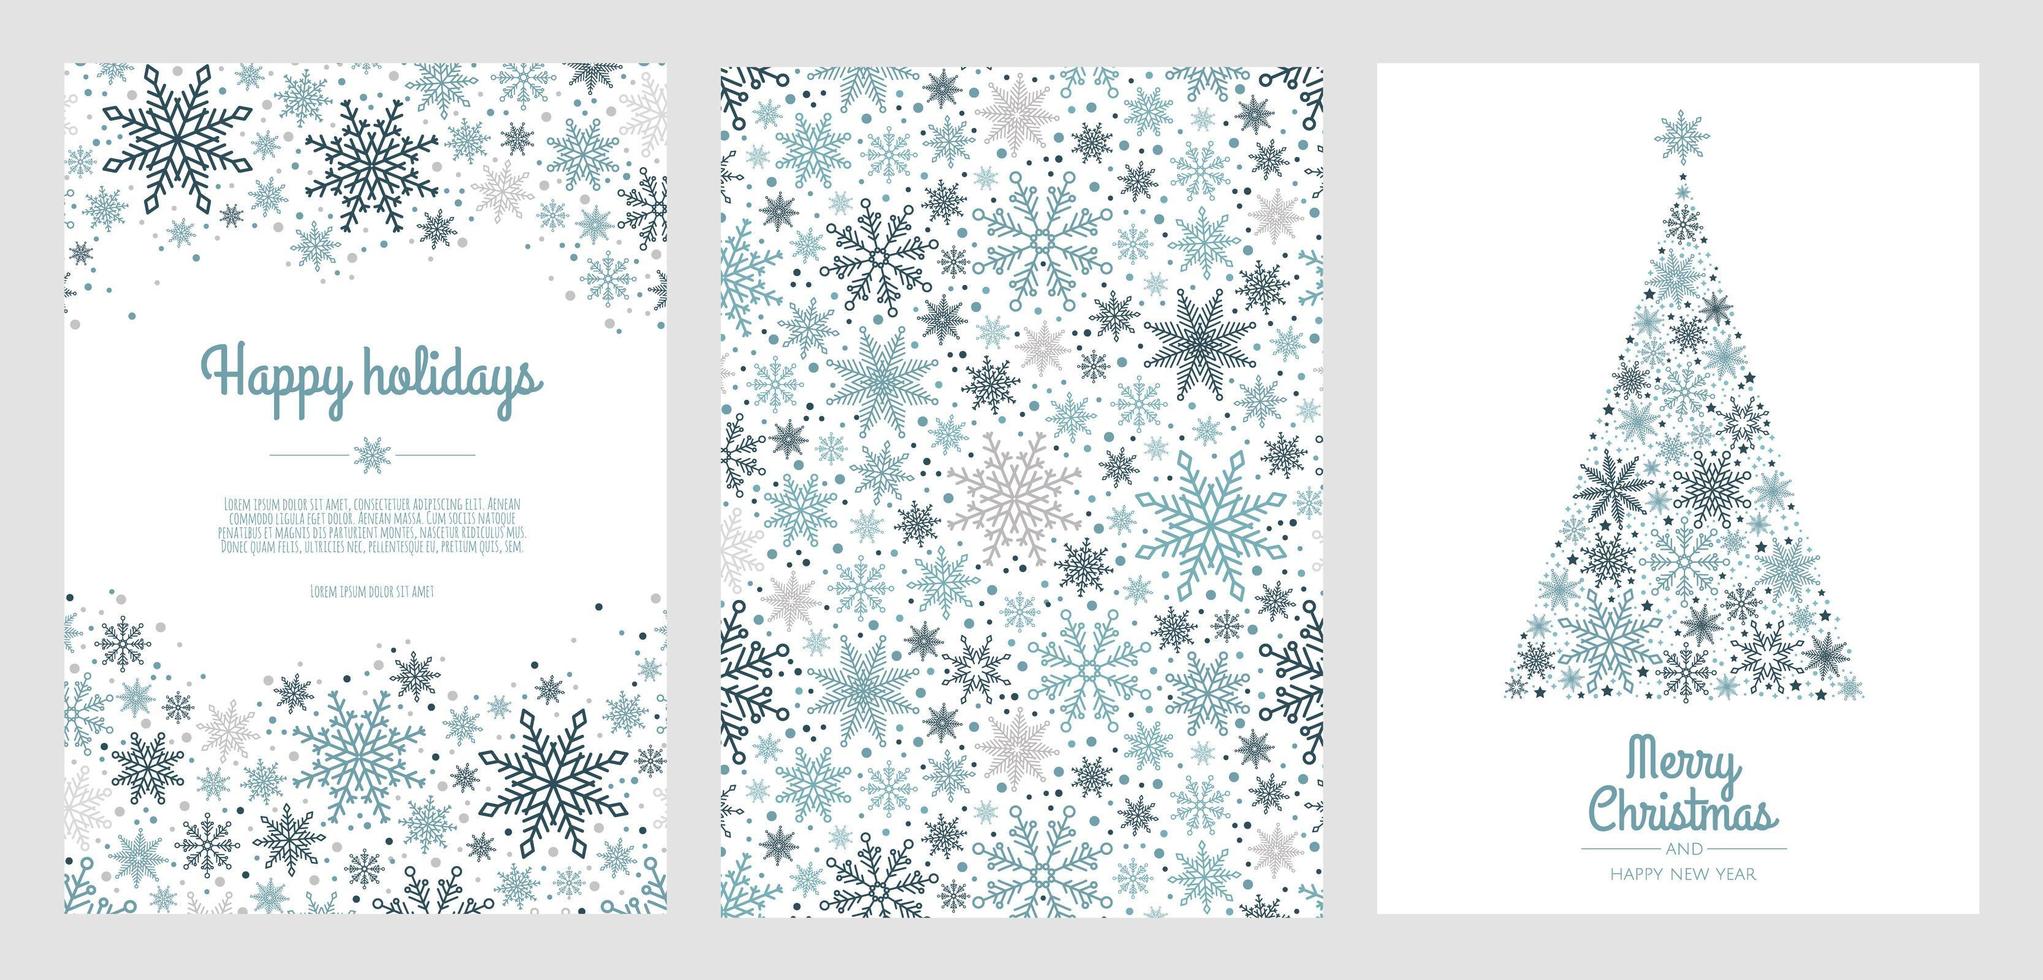 Merry Christmas template. Corporate Holiday cards and invitations. Floral frames and backgrounds design. vector